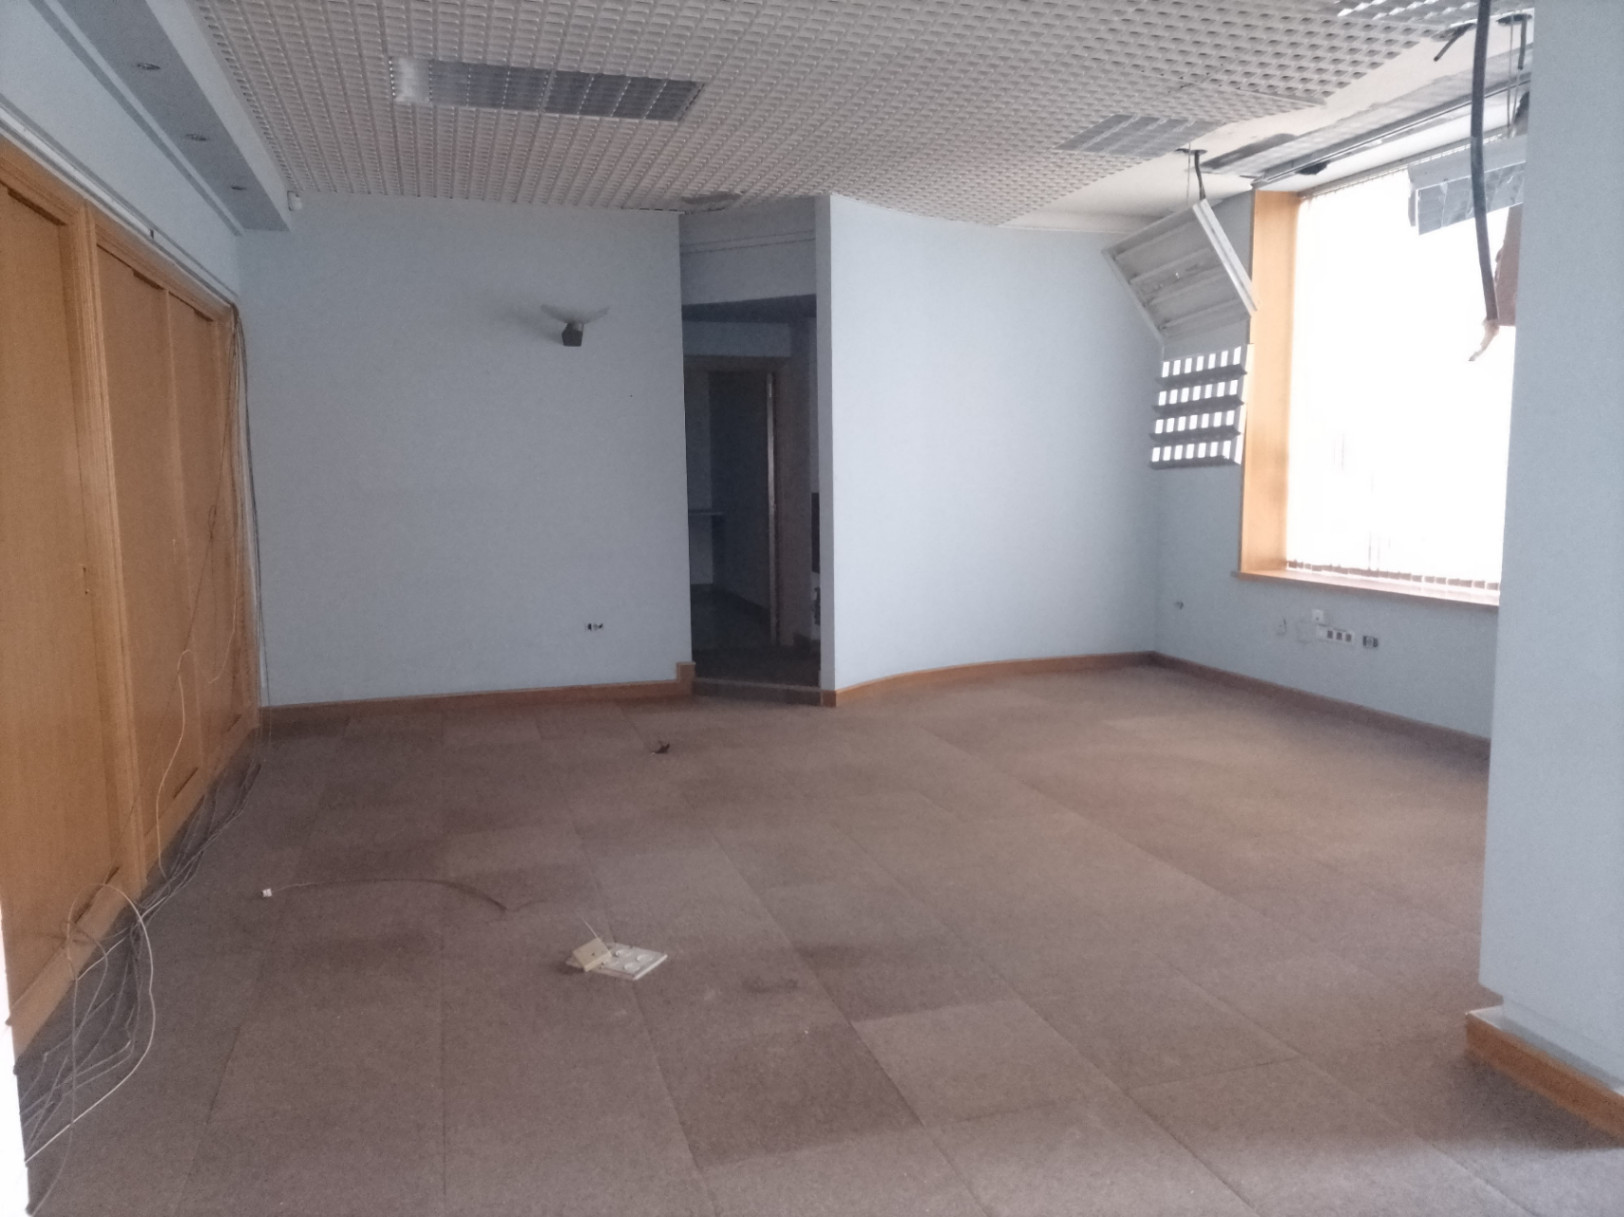 Conditioned commercial premises of 136 meters with mezzanine of 95 meters